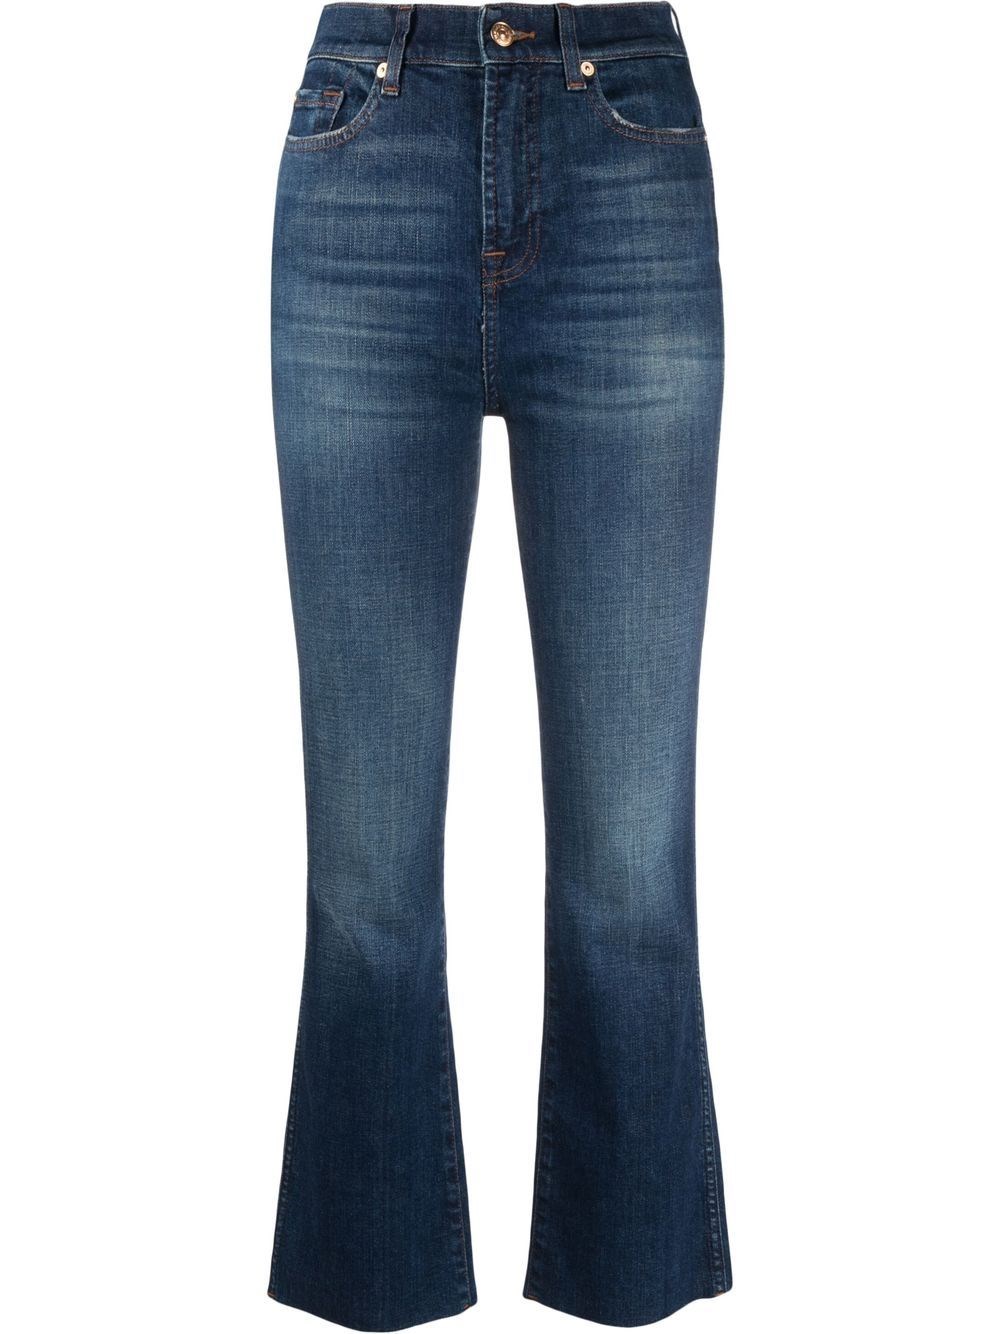 7 FOR ALL MANKIND `SLIM ILLUSION FORCE` JEANS WITH RAW CUT HEM